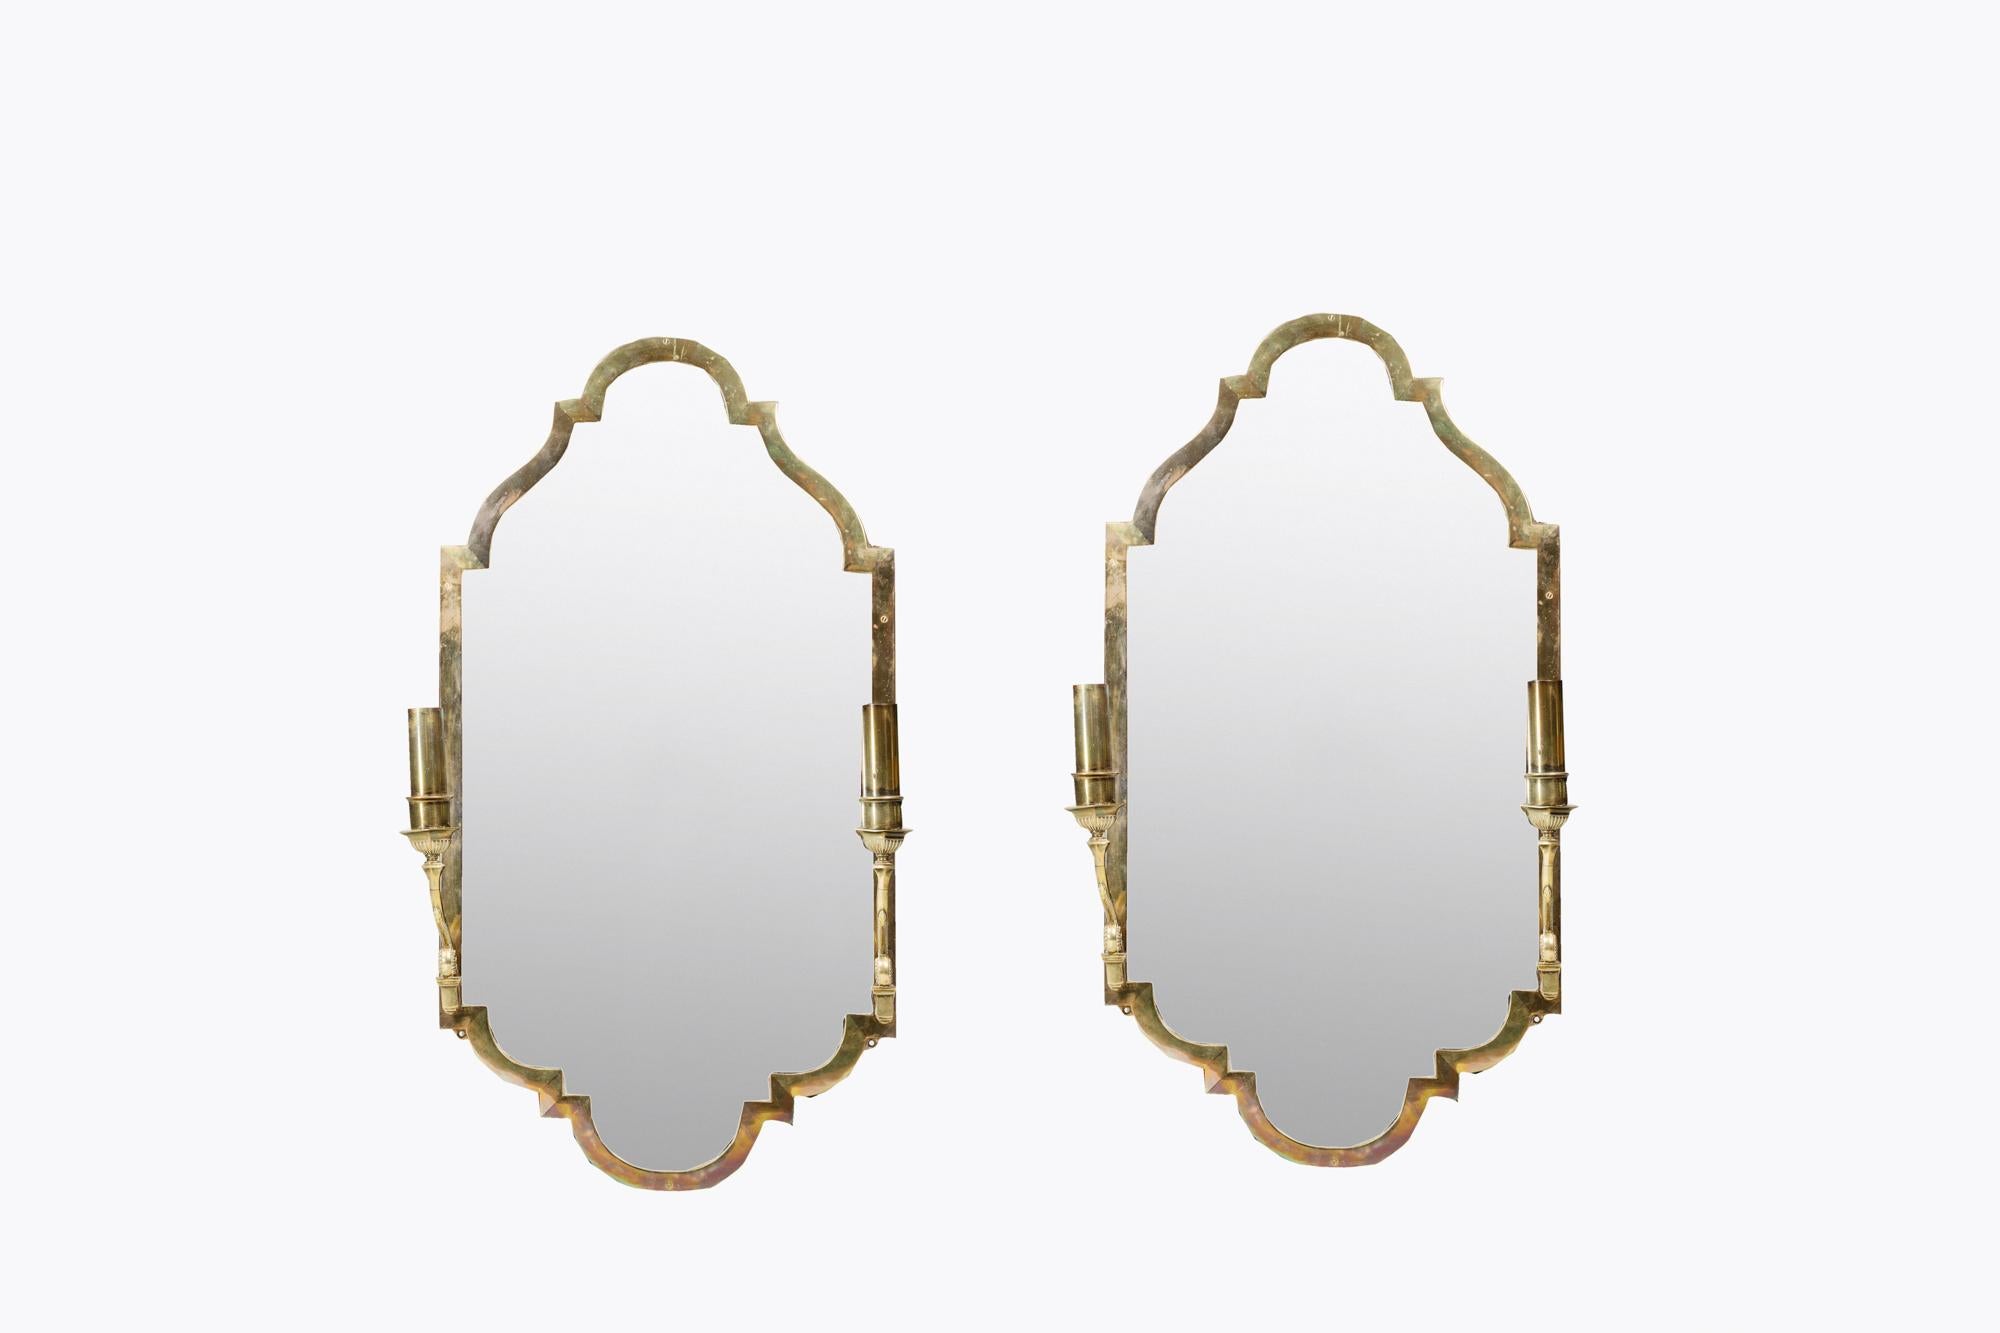 19th Century pair girandole mirrors with bevelled glass and brass frames with arched tops and bases. Each with a pair of scroll stemmed candle holders.